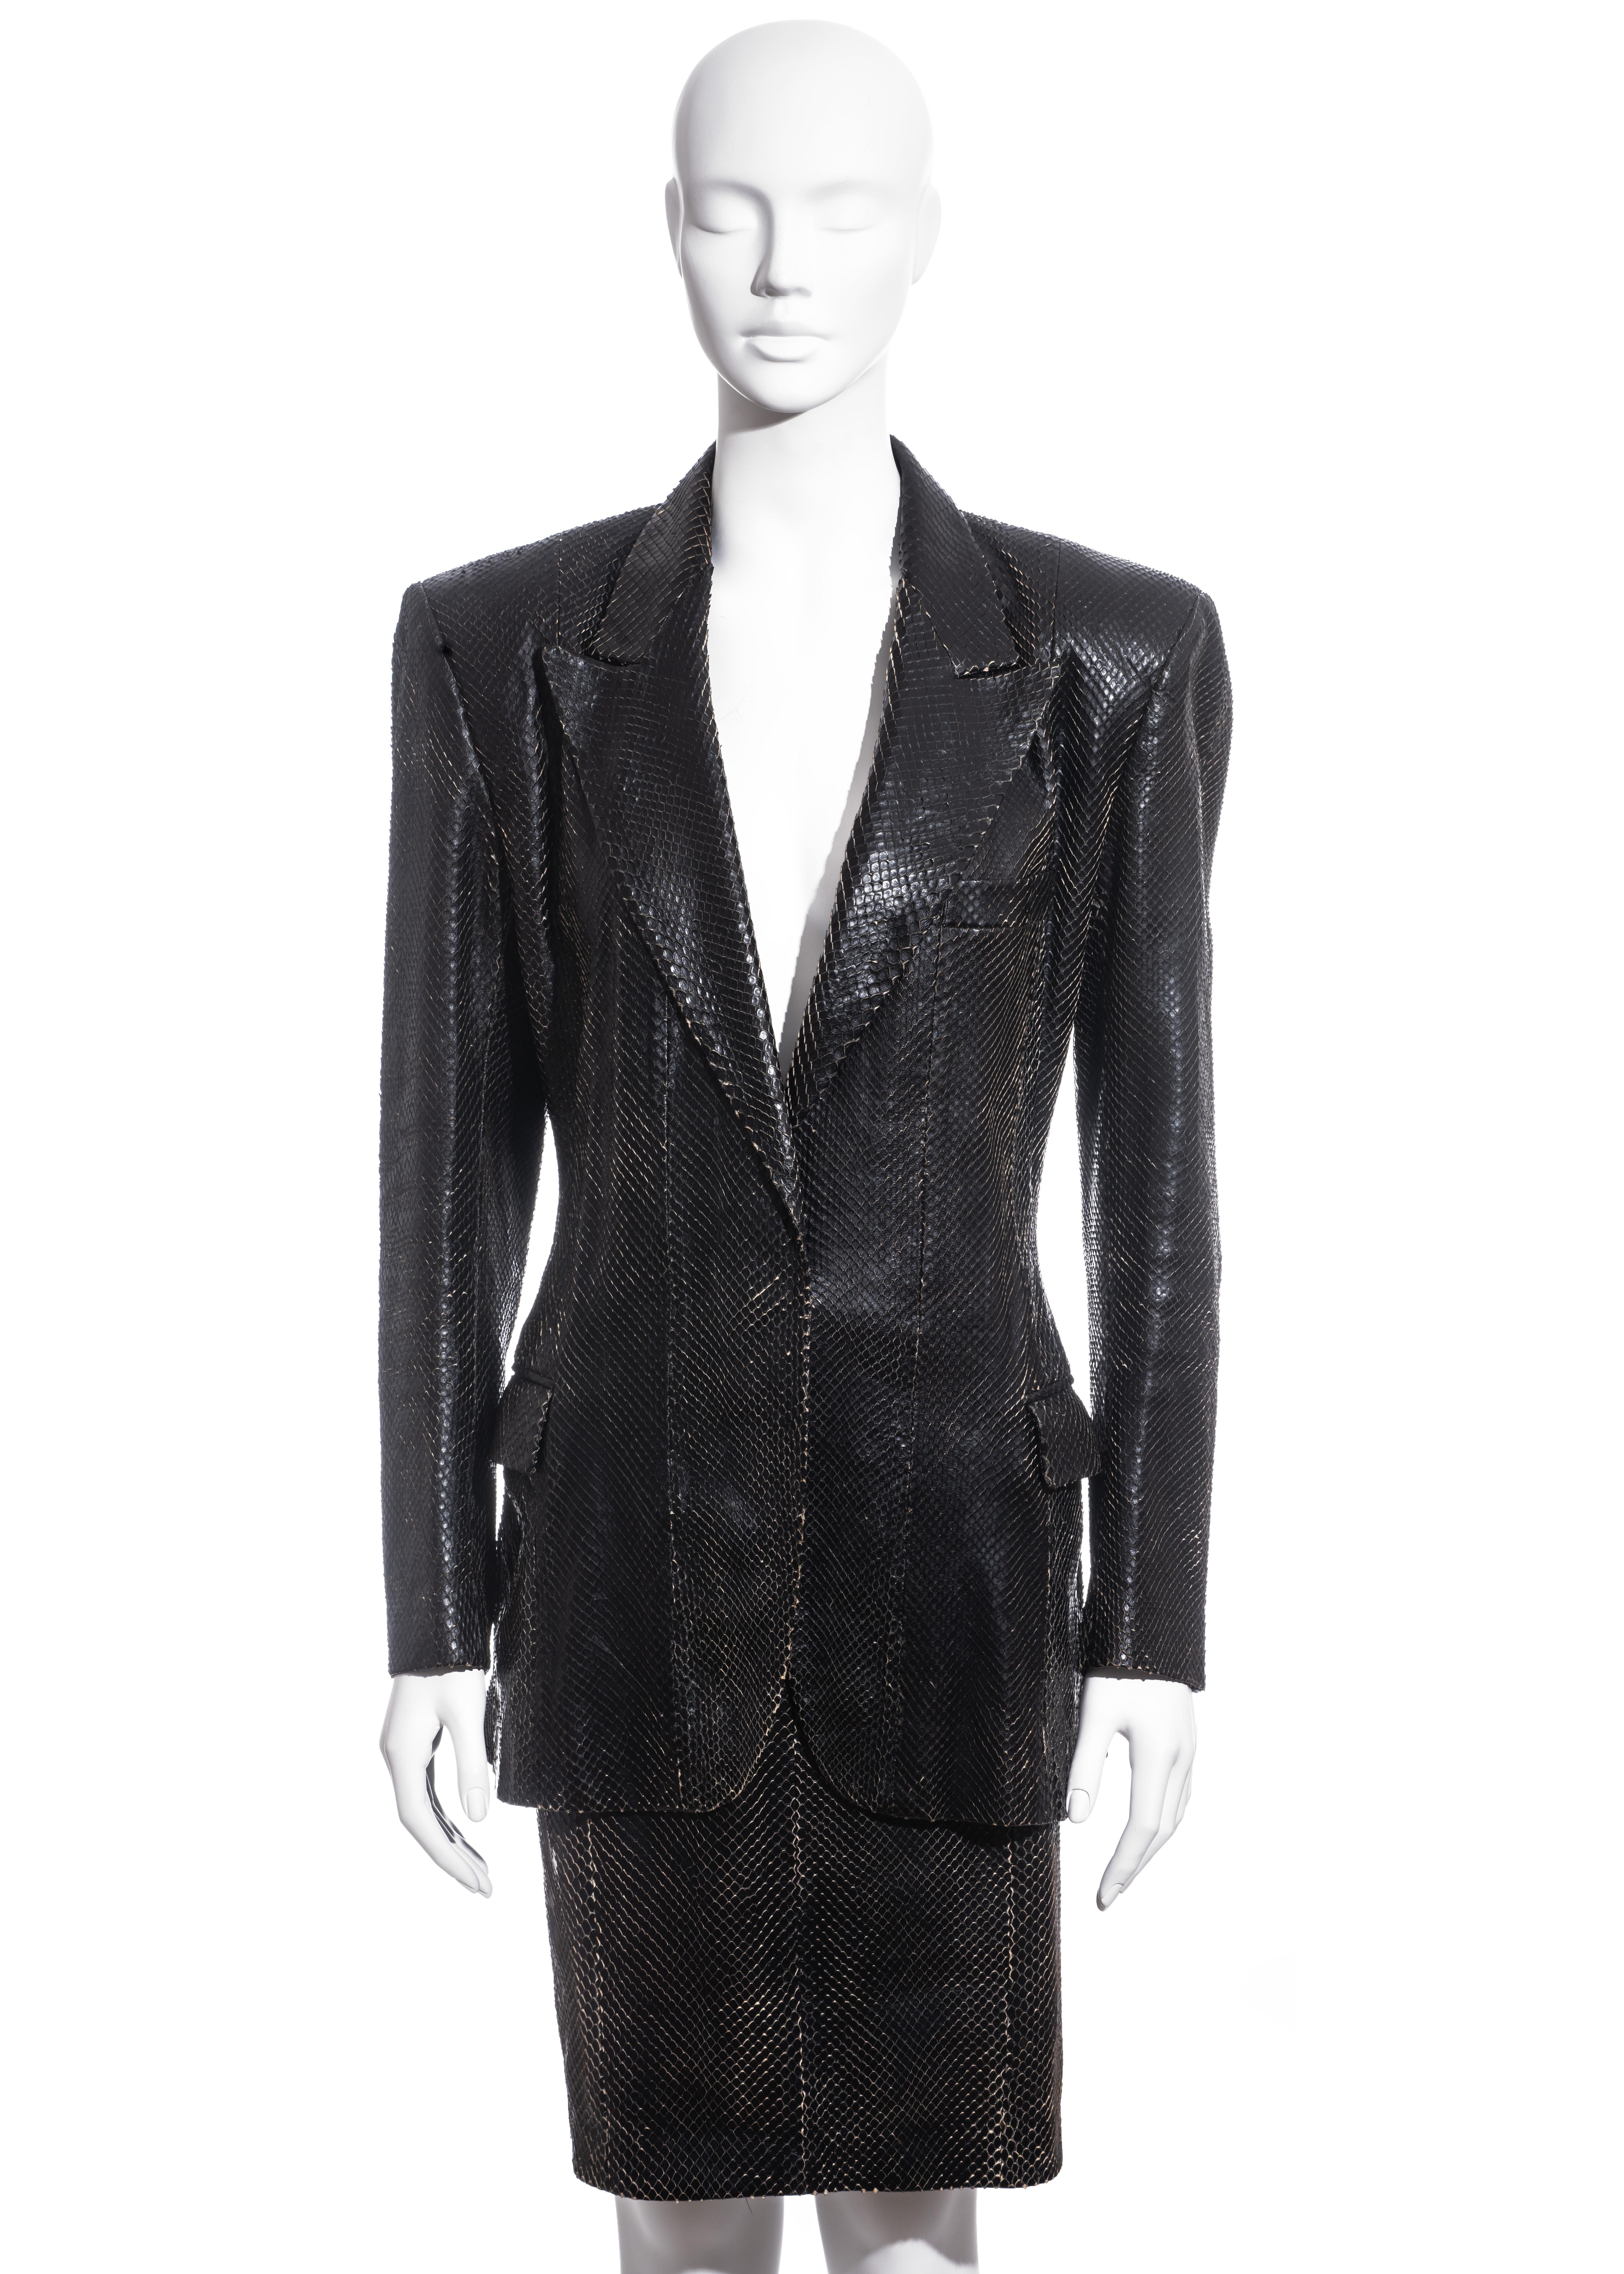 Women's Yves Saint Laurent by Tom Ford black python blazer and skirt suit, ss 2001